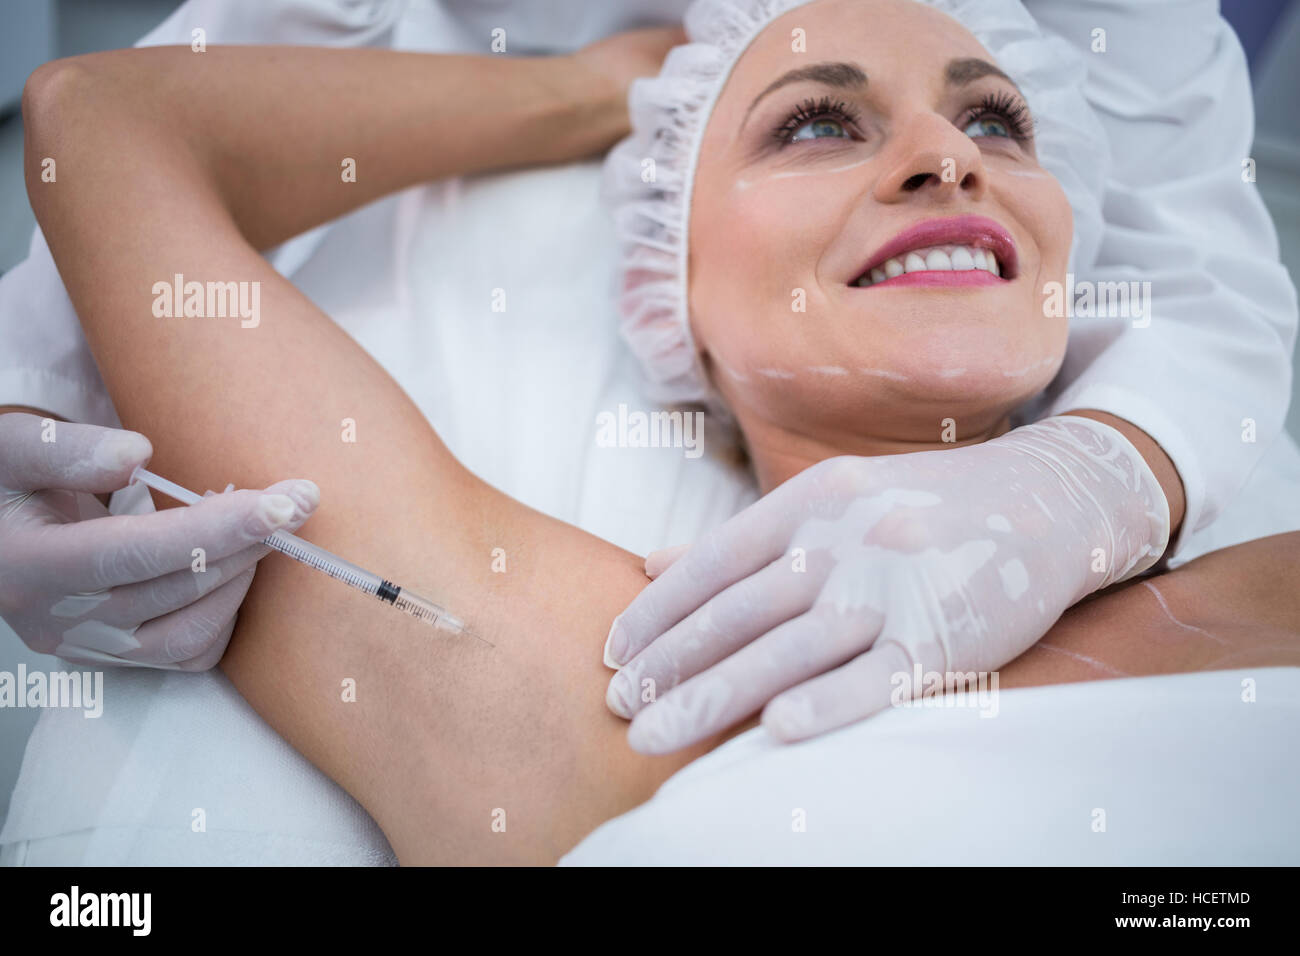 Doctor injecting woman on her arm pits Stock Photo